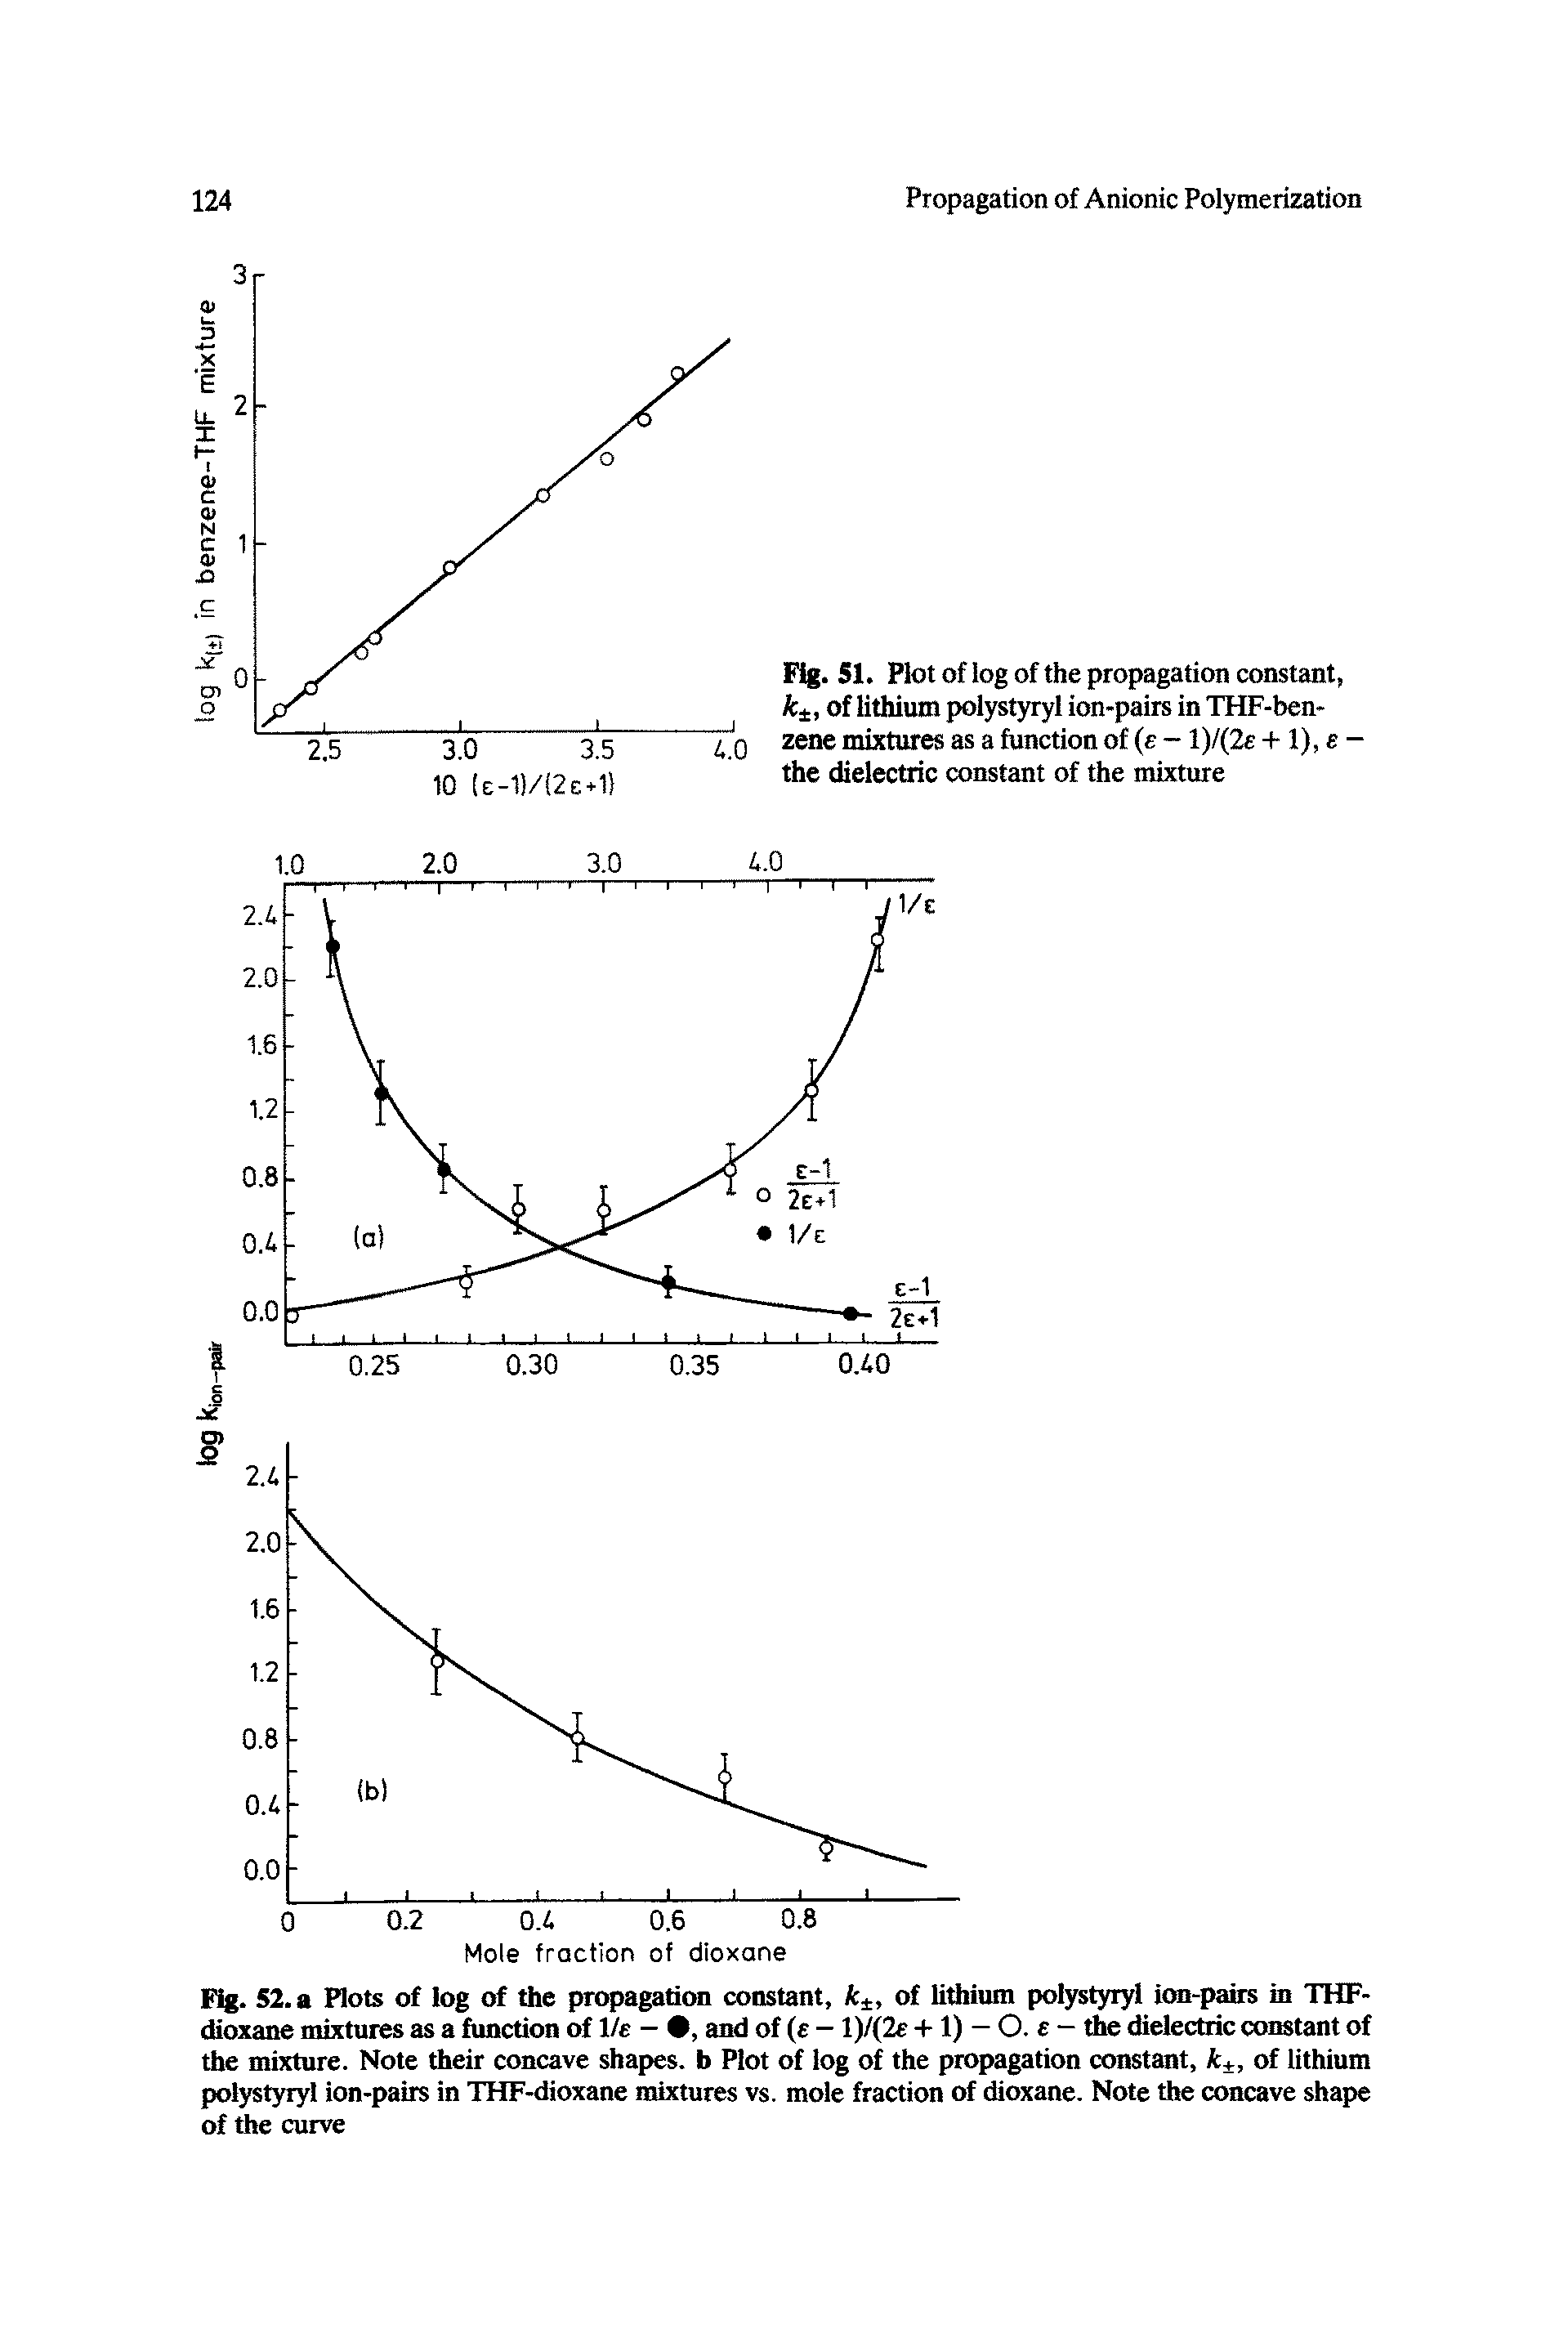 Fig. 51. Plot of log of the propagation constant, k , of lithium polystyryl ion-pairs in THF-ben-zene mixtures as a function of (e - l)/(2e + 1), e -the dielectric constant of the mixture...